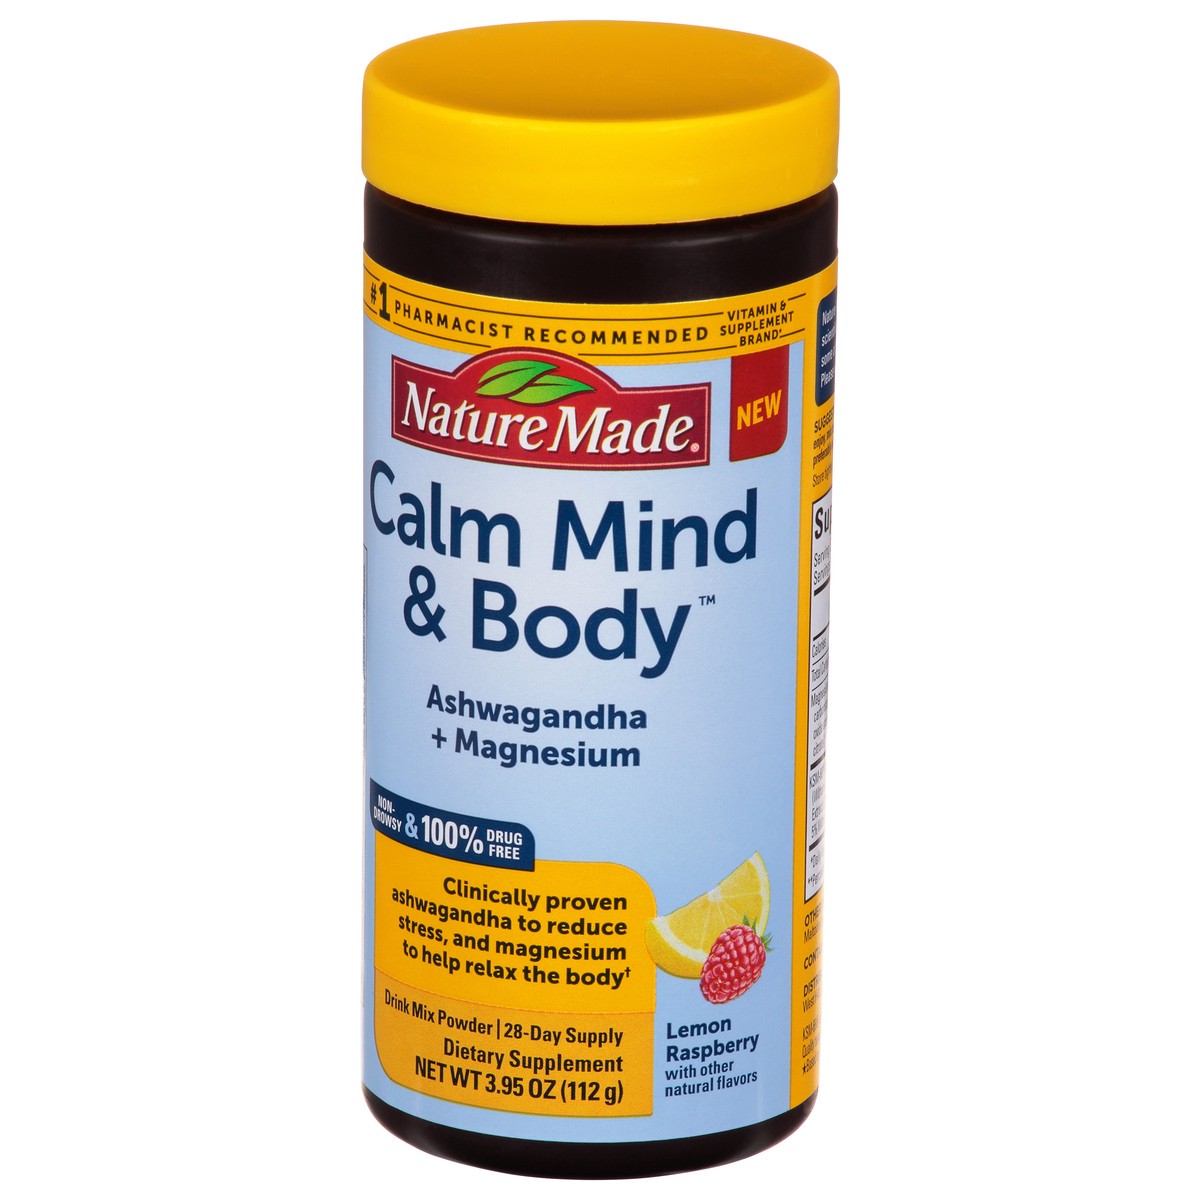 slide 4 of 10, Nature Made Calm Mind & Body Drink Mix, Ashwagandha to Reduce Stress, Magnesium to Help Relax Your Body, Non-Drowsy, 100% Drug-Free, Lemon Raspberry, 3.95 oz, 95 oz